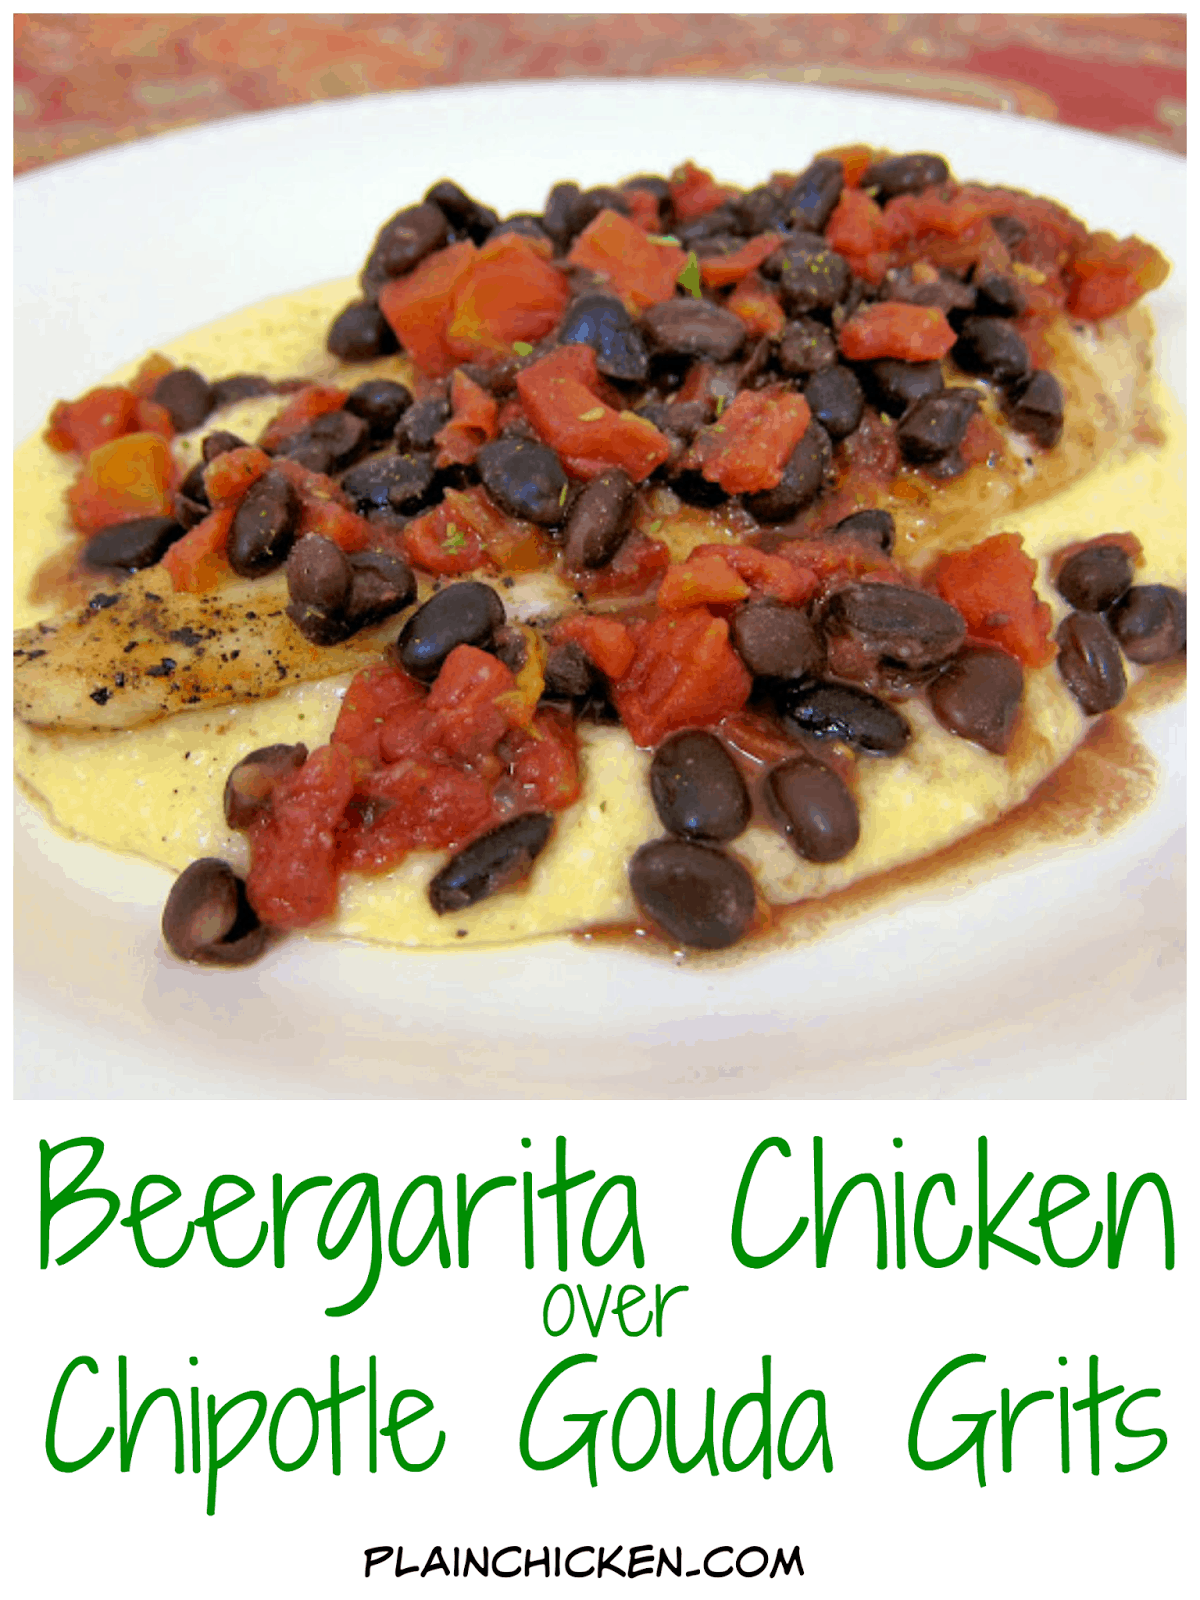 Beergaria Chicken over Chipotle Gouda Grits Recipe - chicken marinated in margarita mix, beer, and rotel, grilled and served over chipotle gouda grits and topped with spicy black beans. We literally licked our plates! Great mexican fiesta! My husband inhaled this and asked if I made extra - next time I will double the recipe. It is that good!